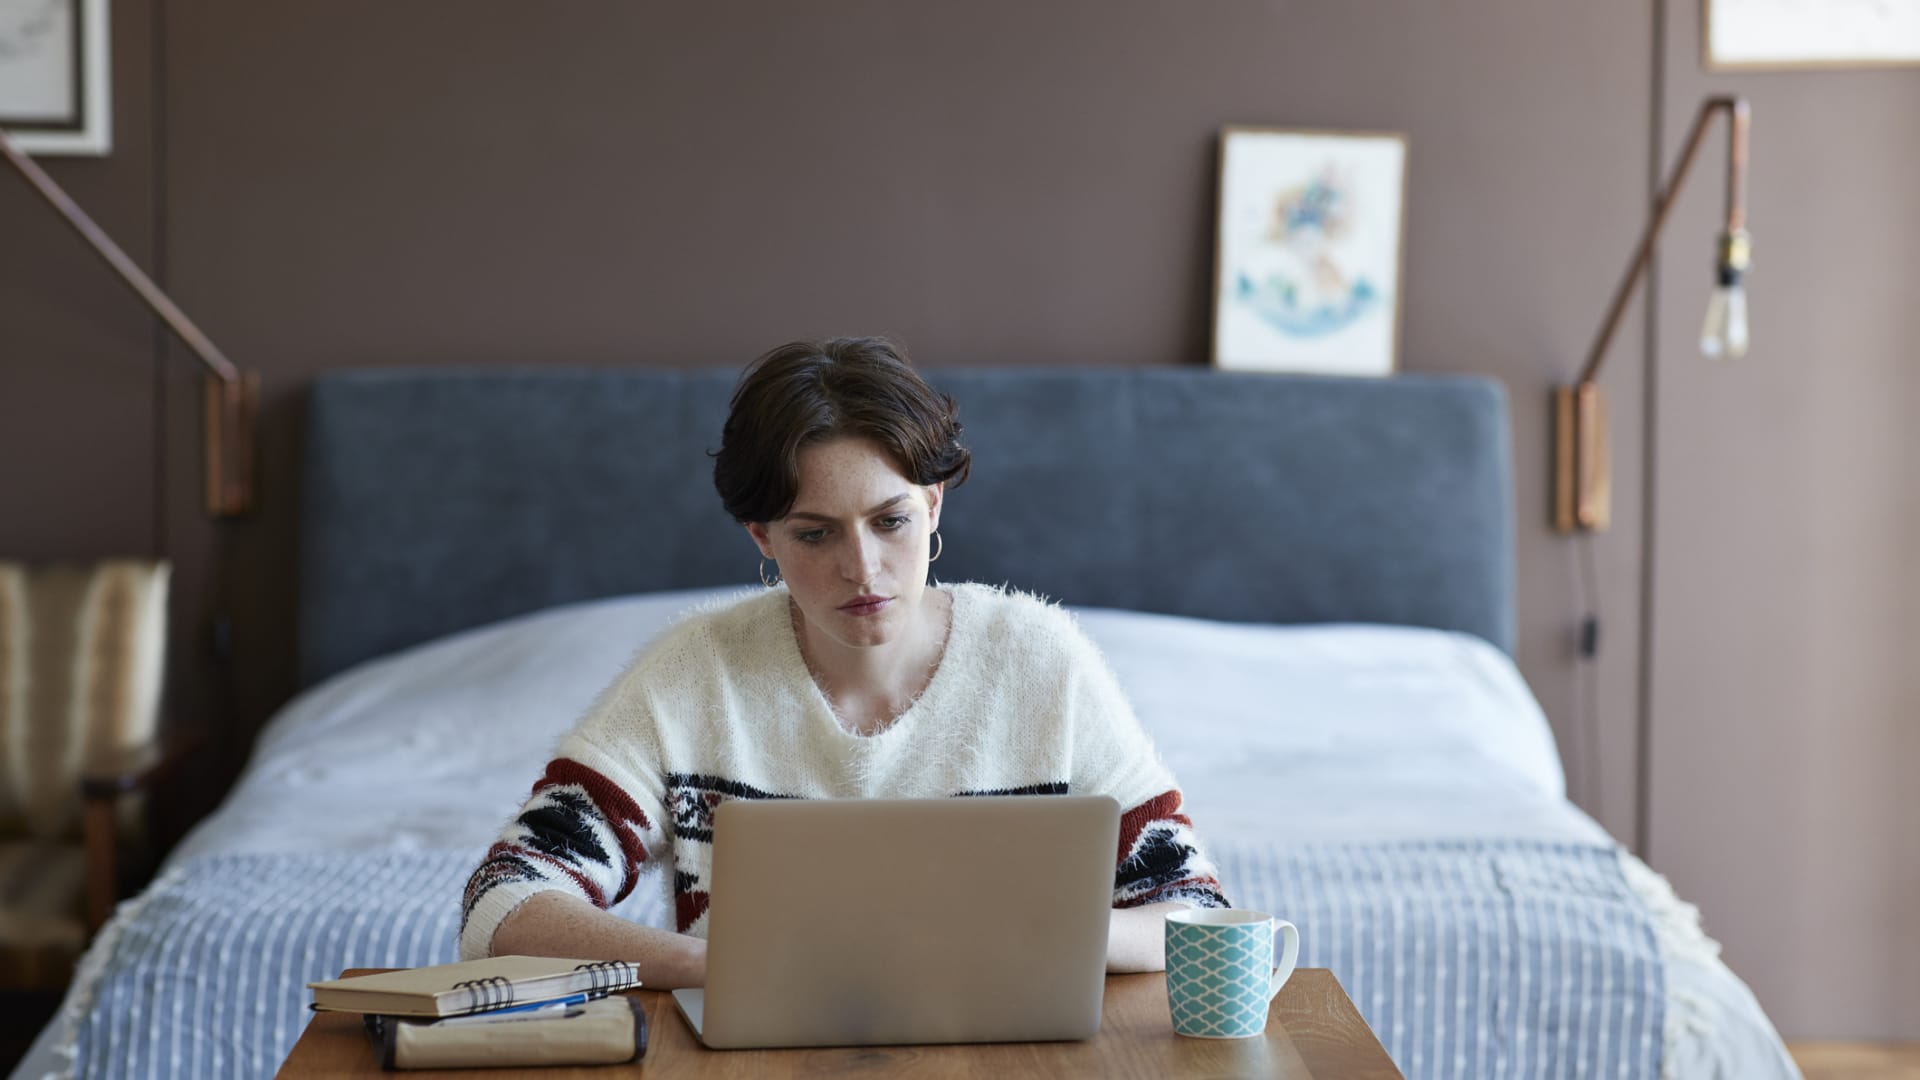 How to work from your bedroom without ruining your sleep, according to experts